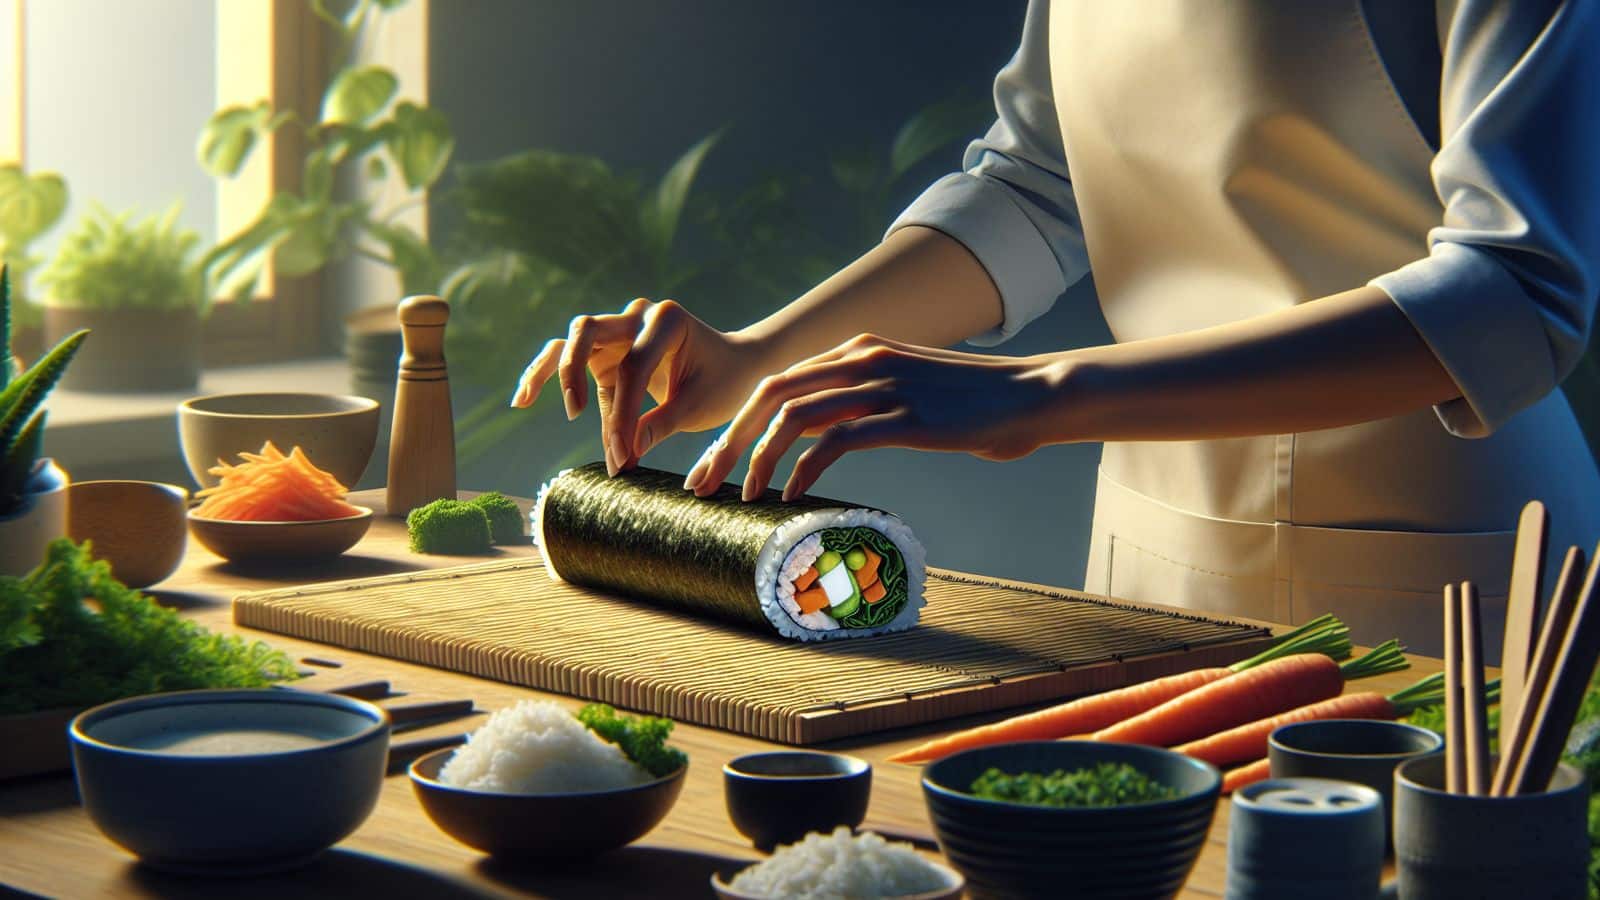 Make a Japanese sushi burrito at home with this recipe